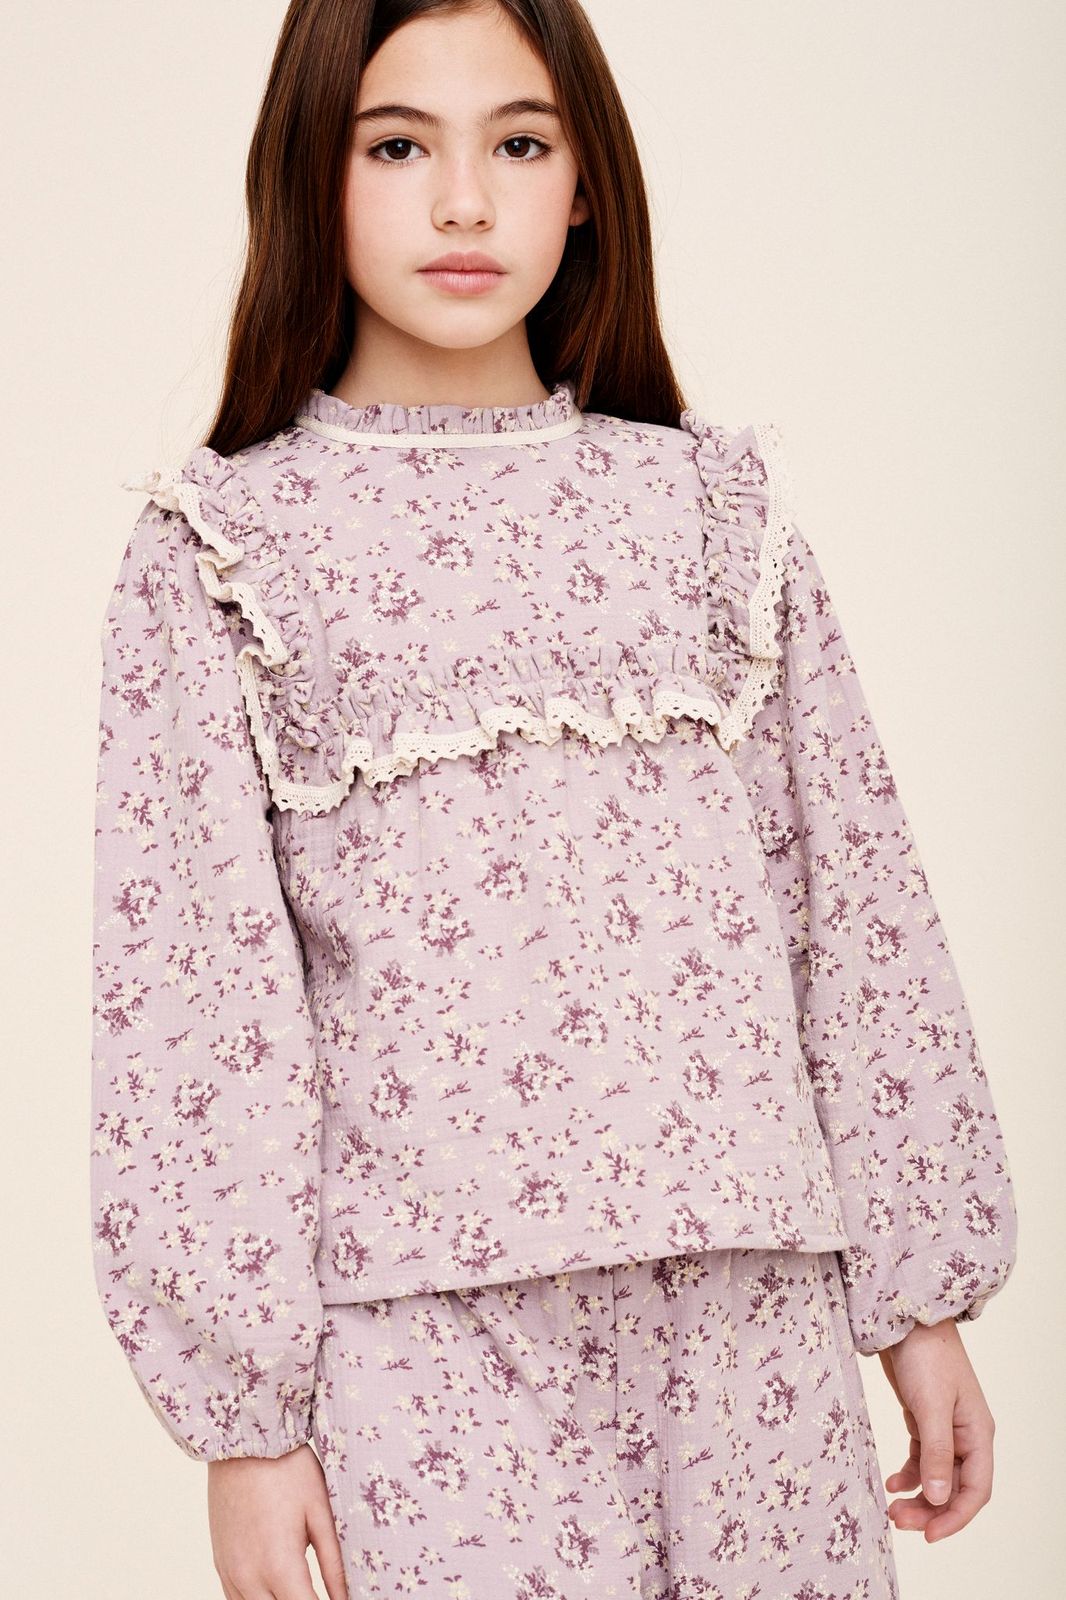 LiiLU / Leria Flower Blouse / lilac floral – Melty Colors